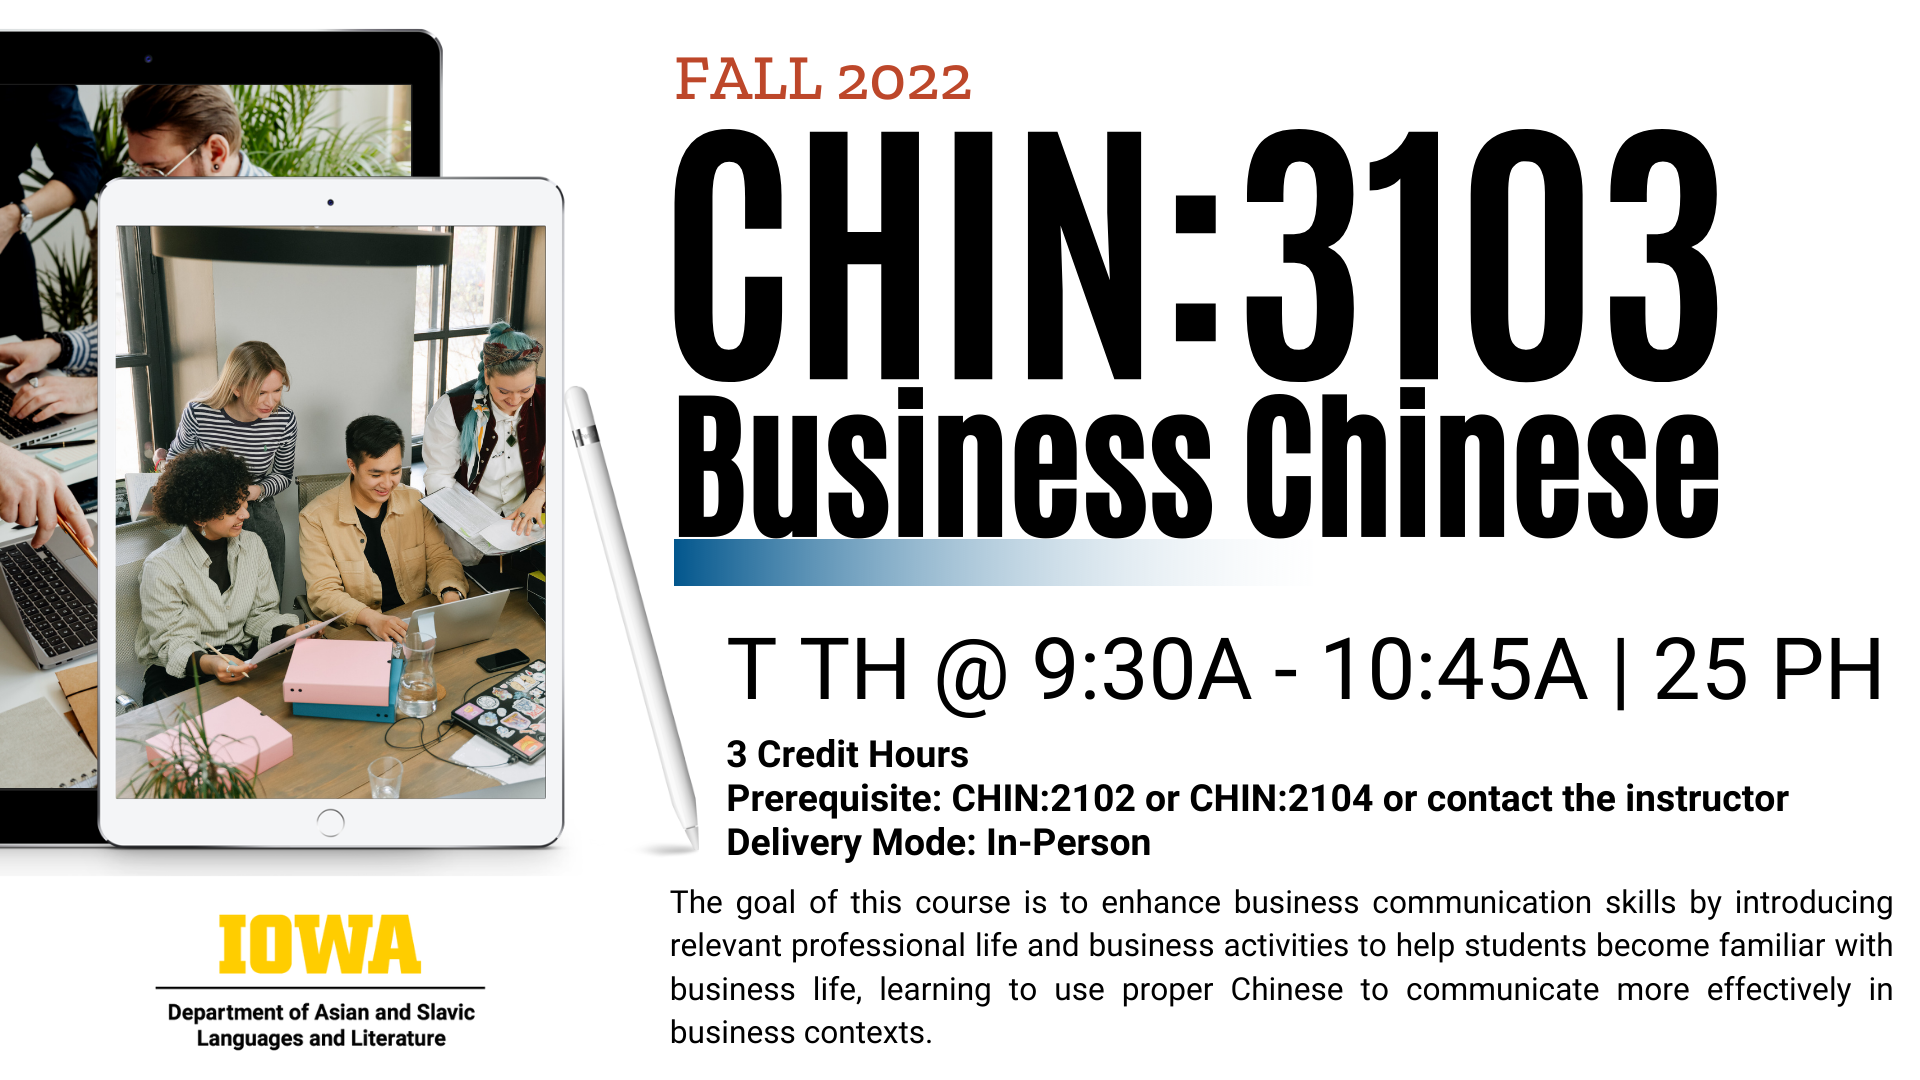 Fall 2022 CHIN: 3103 business Chinese Tuesdays and Thursdays from 9:30 AM to 10:45 AM in 25 Phillips hall 3 credit hours pre-requisite CHIN: 2102 or CHIN: 2104 or contact the instructor delivery motors in person the goal of this course is to enhance business communication skills by introducing relevant professional life and business activities to help students become familiar with business life learning to use proper Chinese to communicate more effectively in business contexts the department of Asian and Slavic languages and literatures university of Iowa